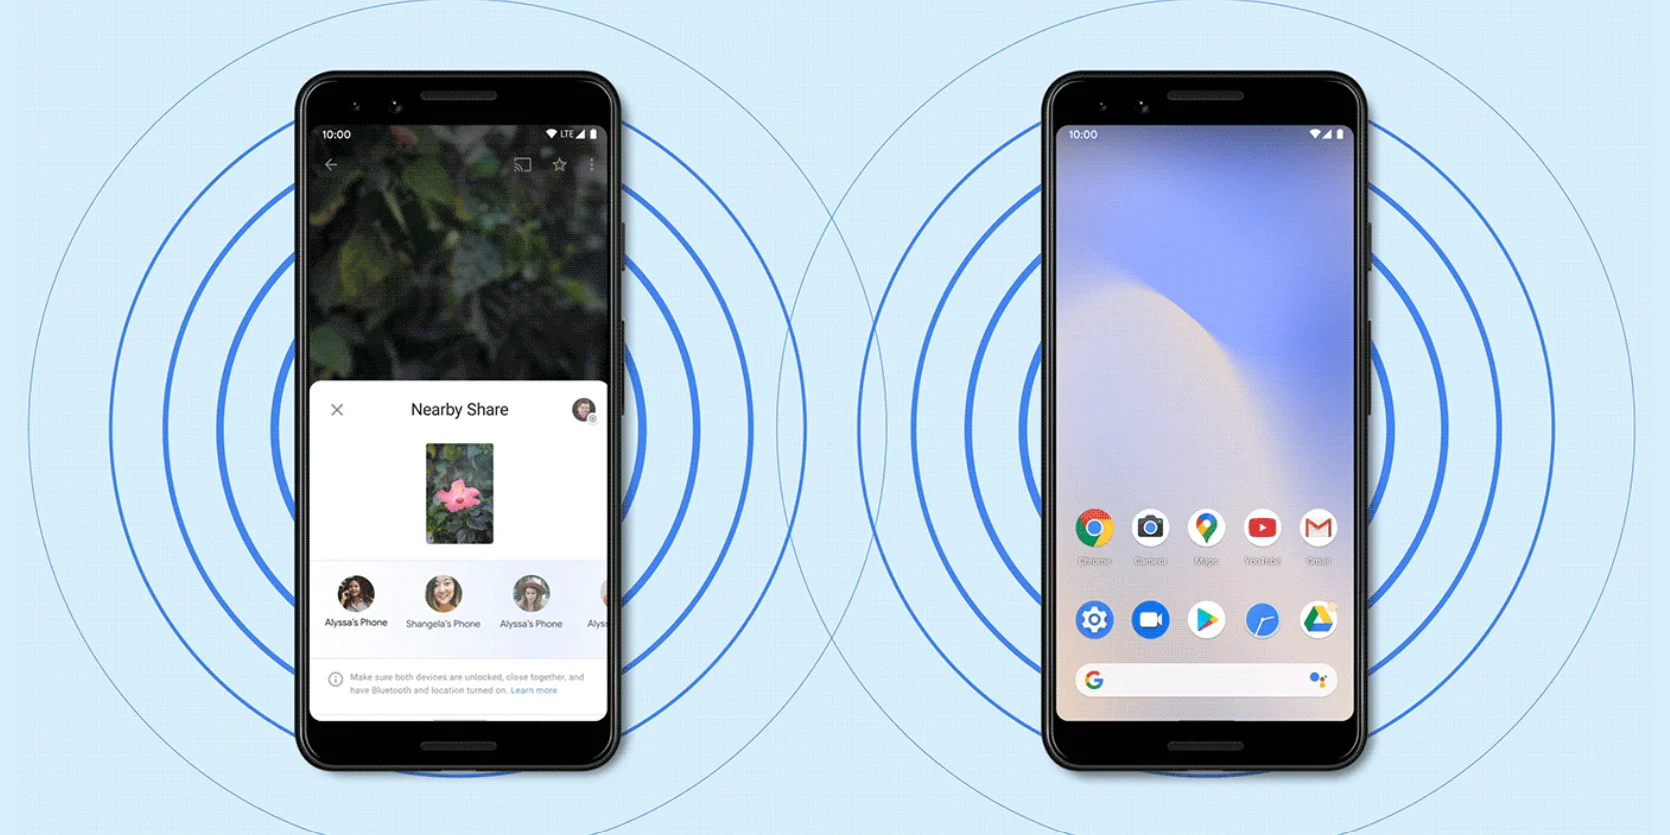 Google has made it much easier to share media between different devices